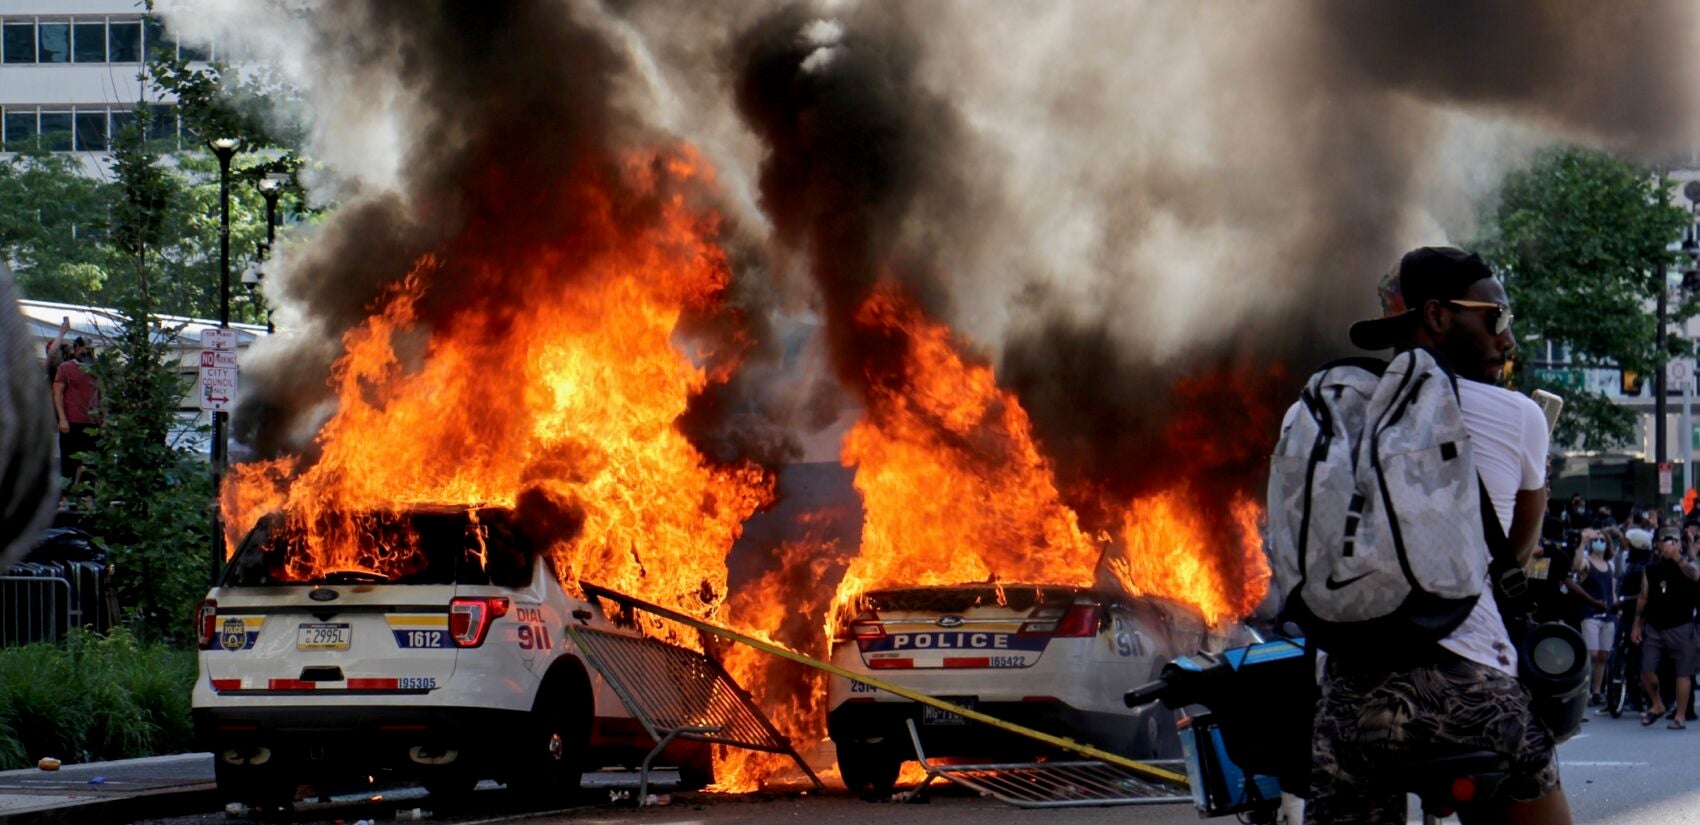 Police cars burn in front of City Hall on May 30, 2020. (Emma Lee/WHYY)